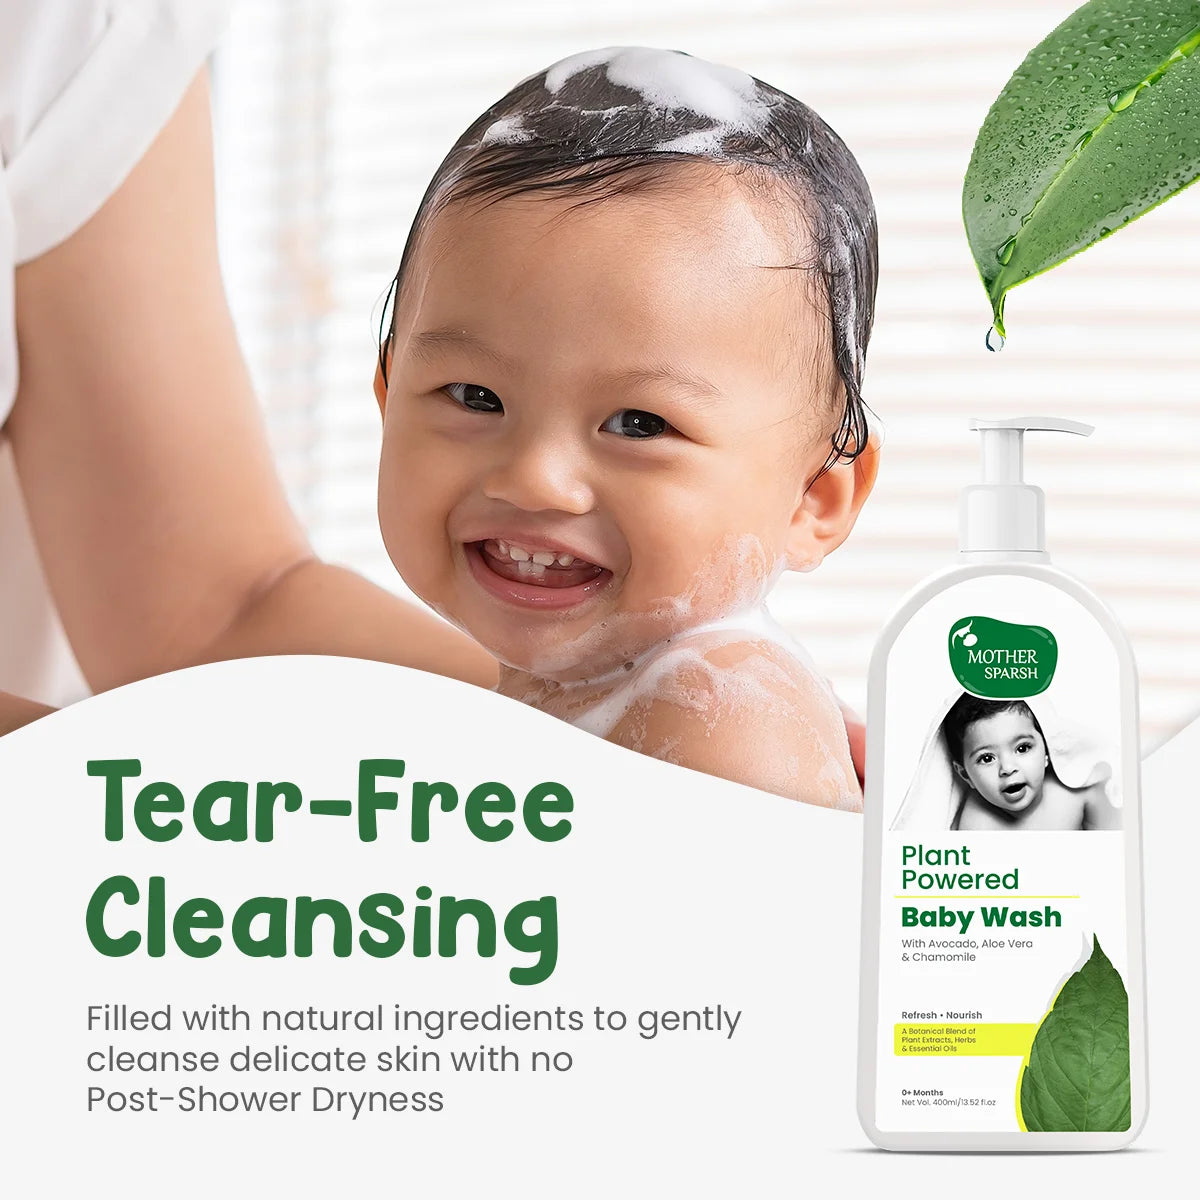 Plant Powered Baby Wash